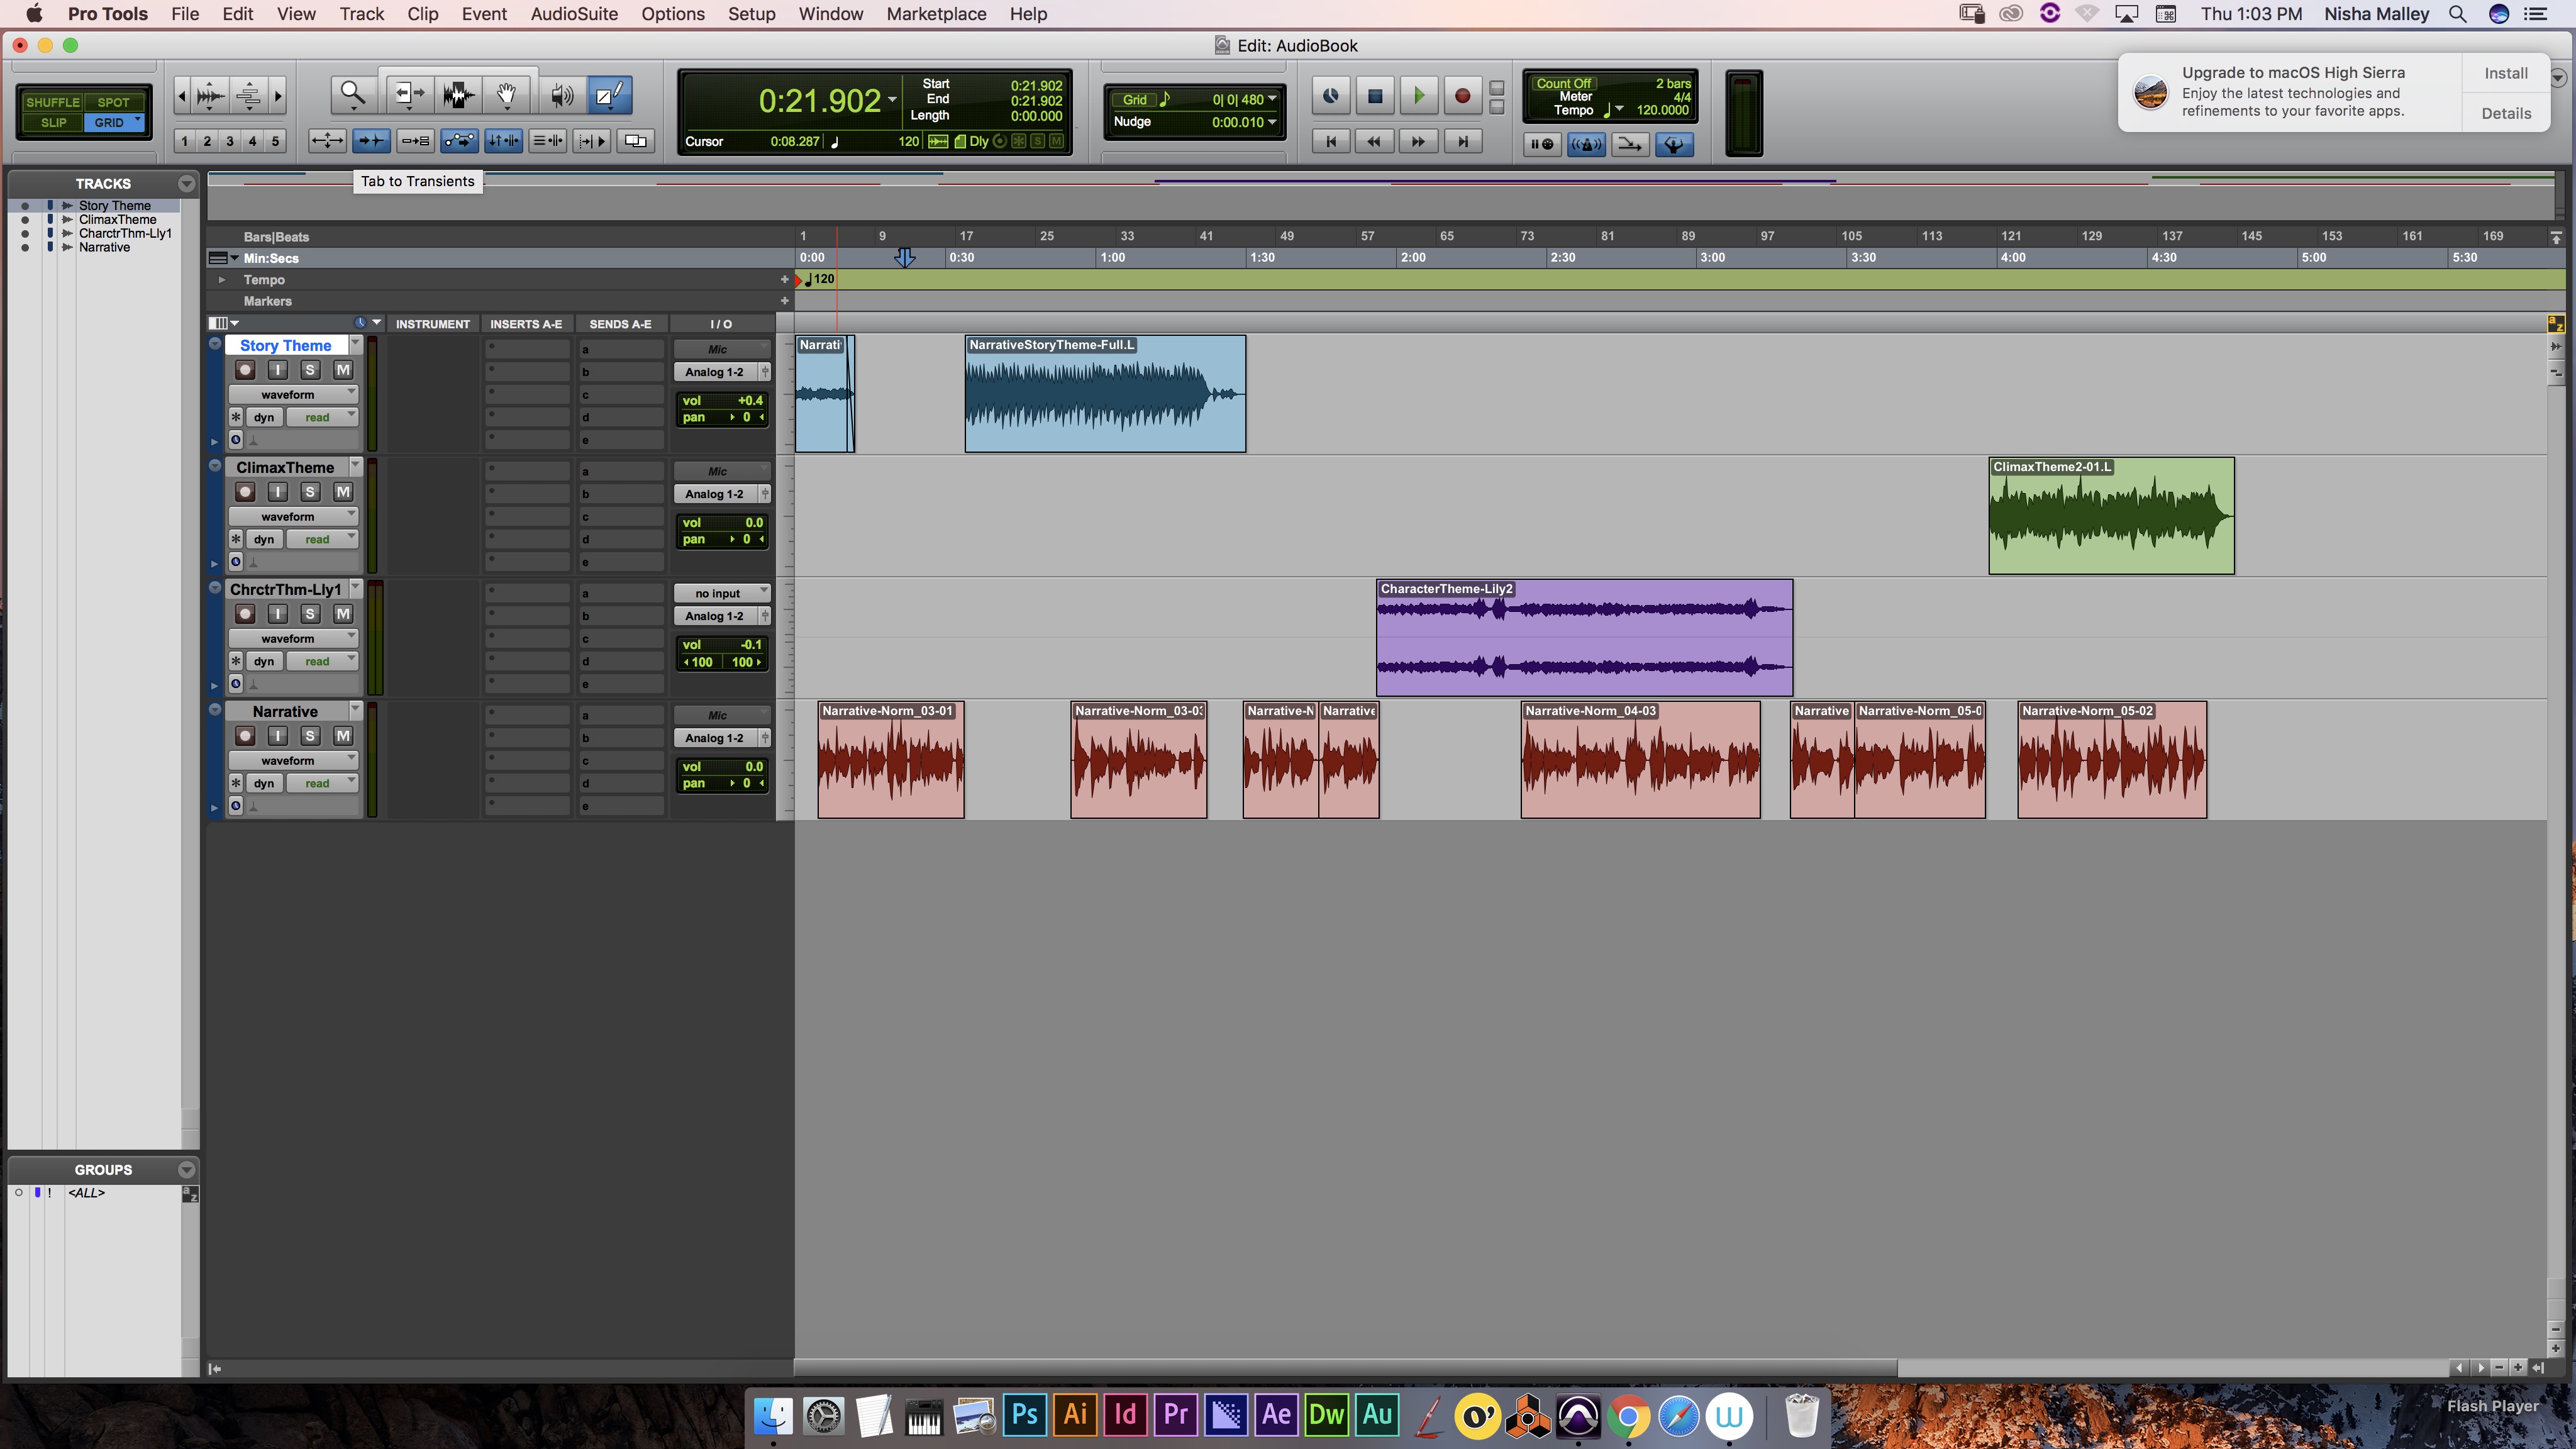 This is a screenshot of my Pro Tools session for my audio book.